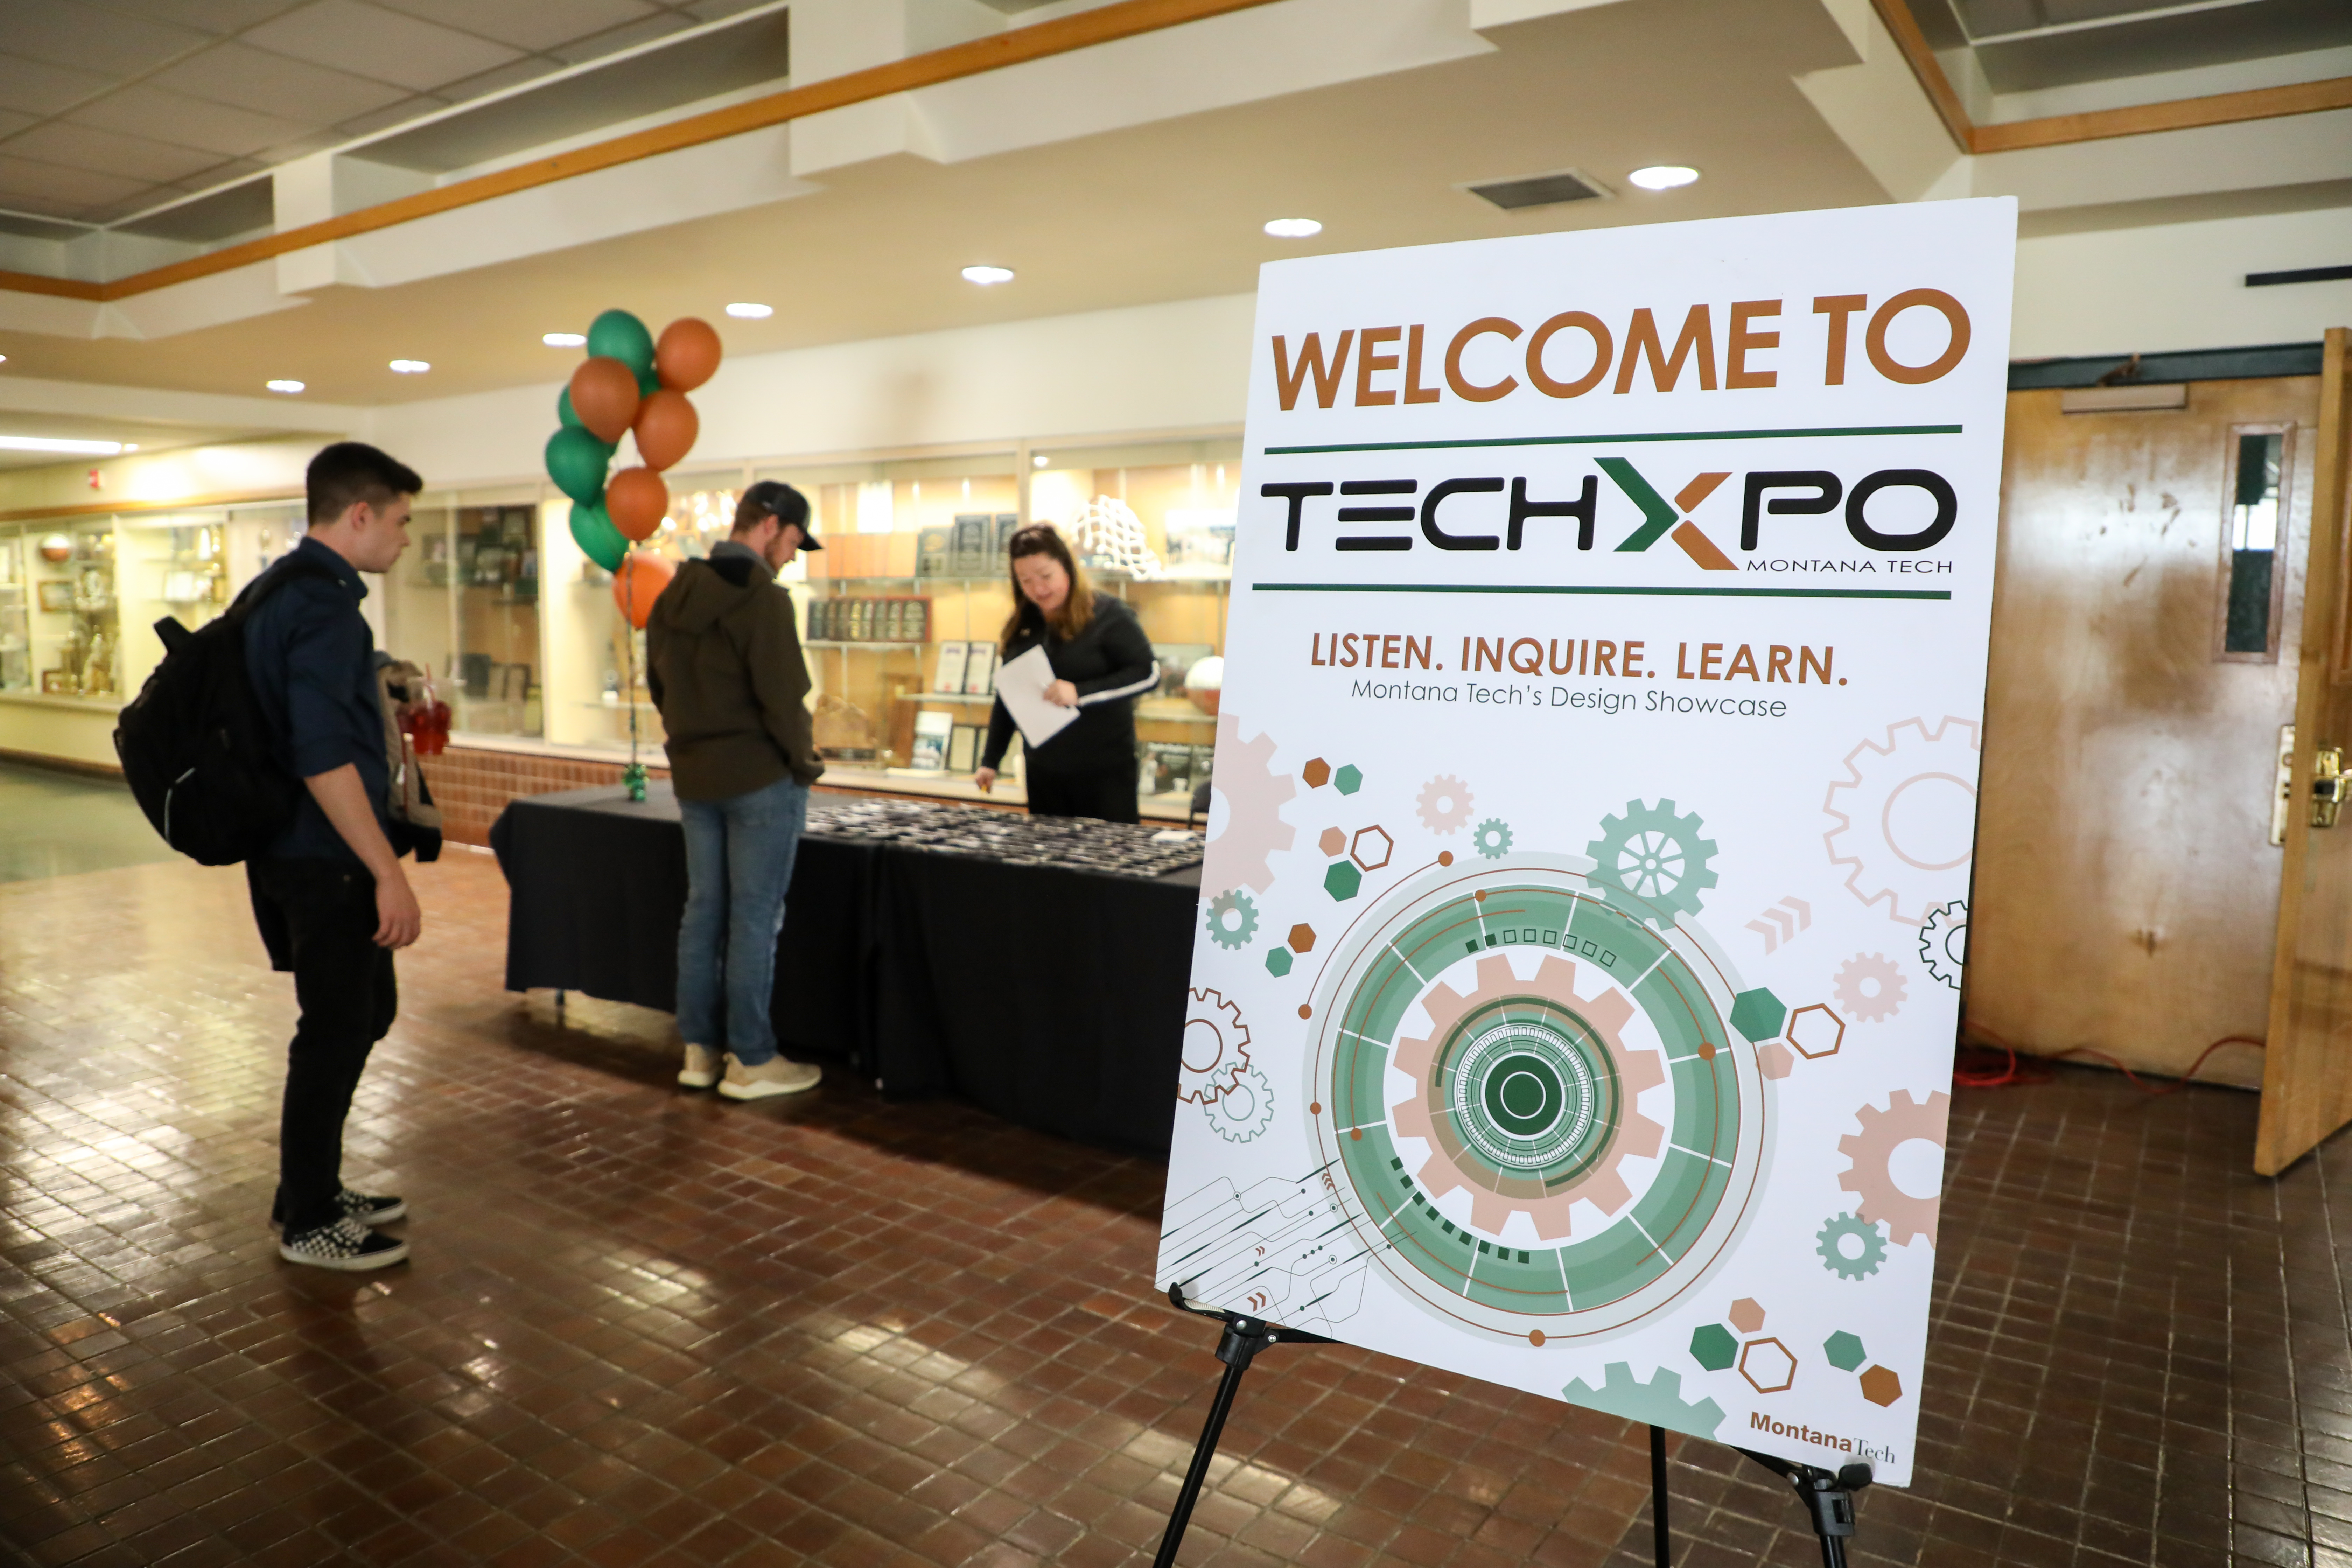 !Sign welcoming people to Techxpo